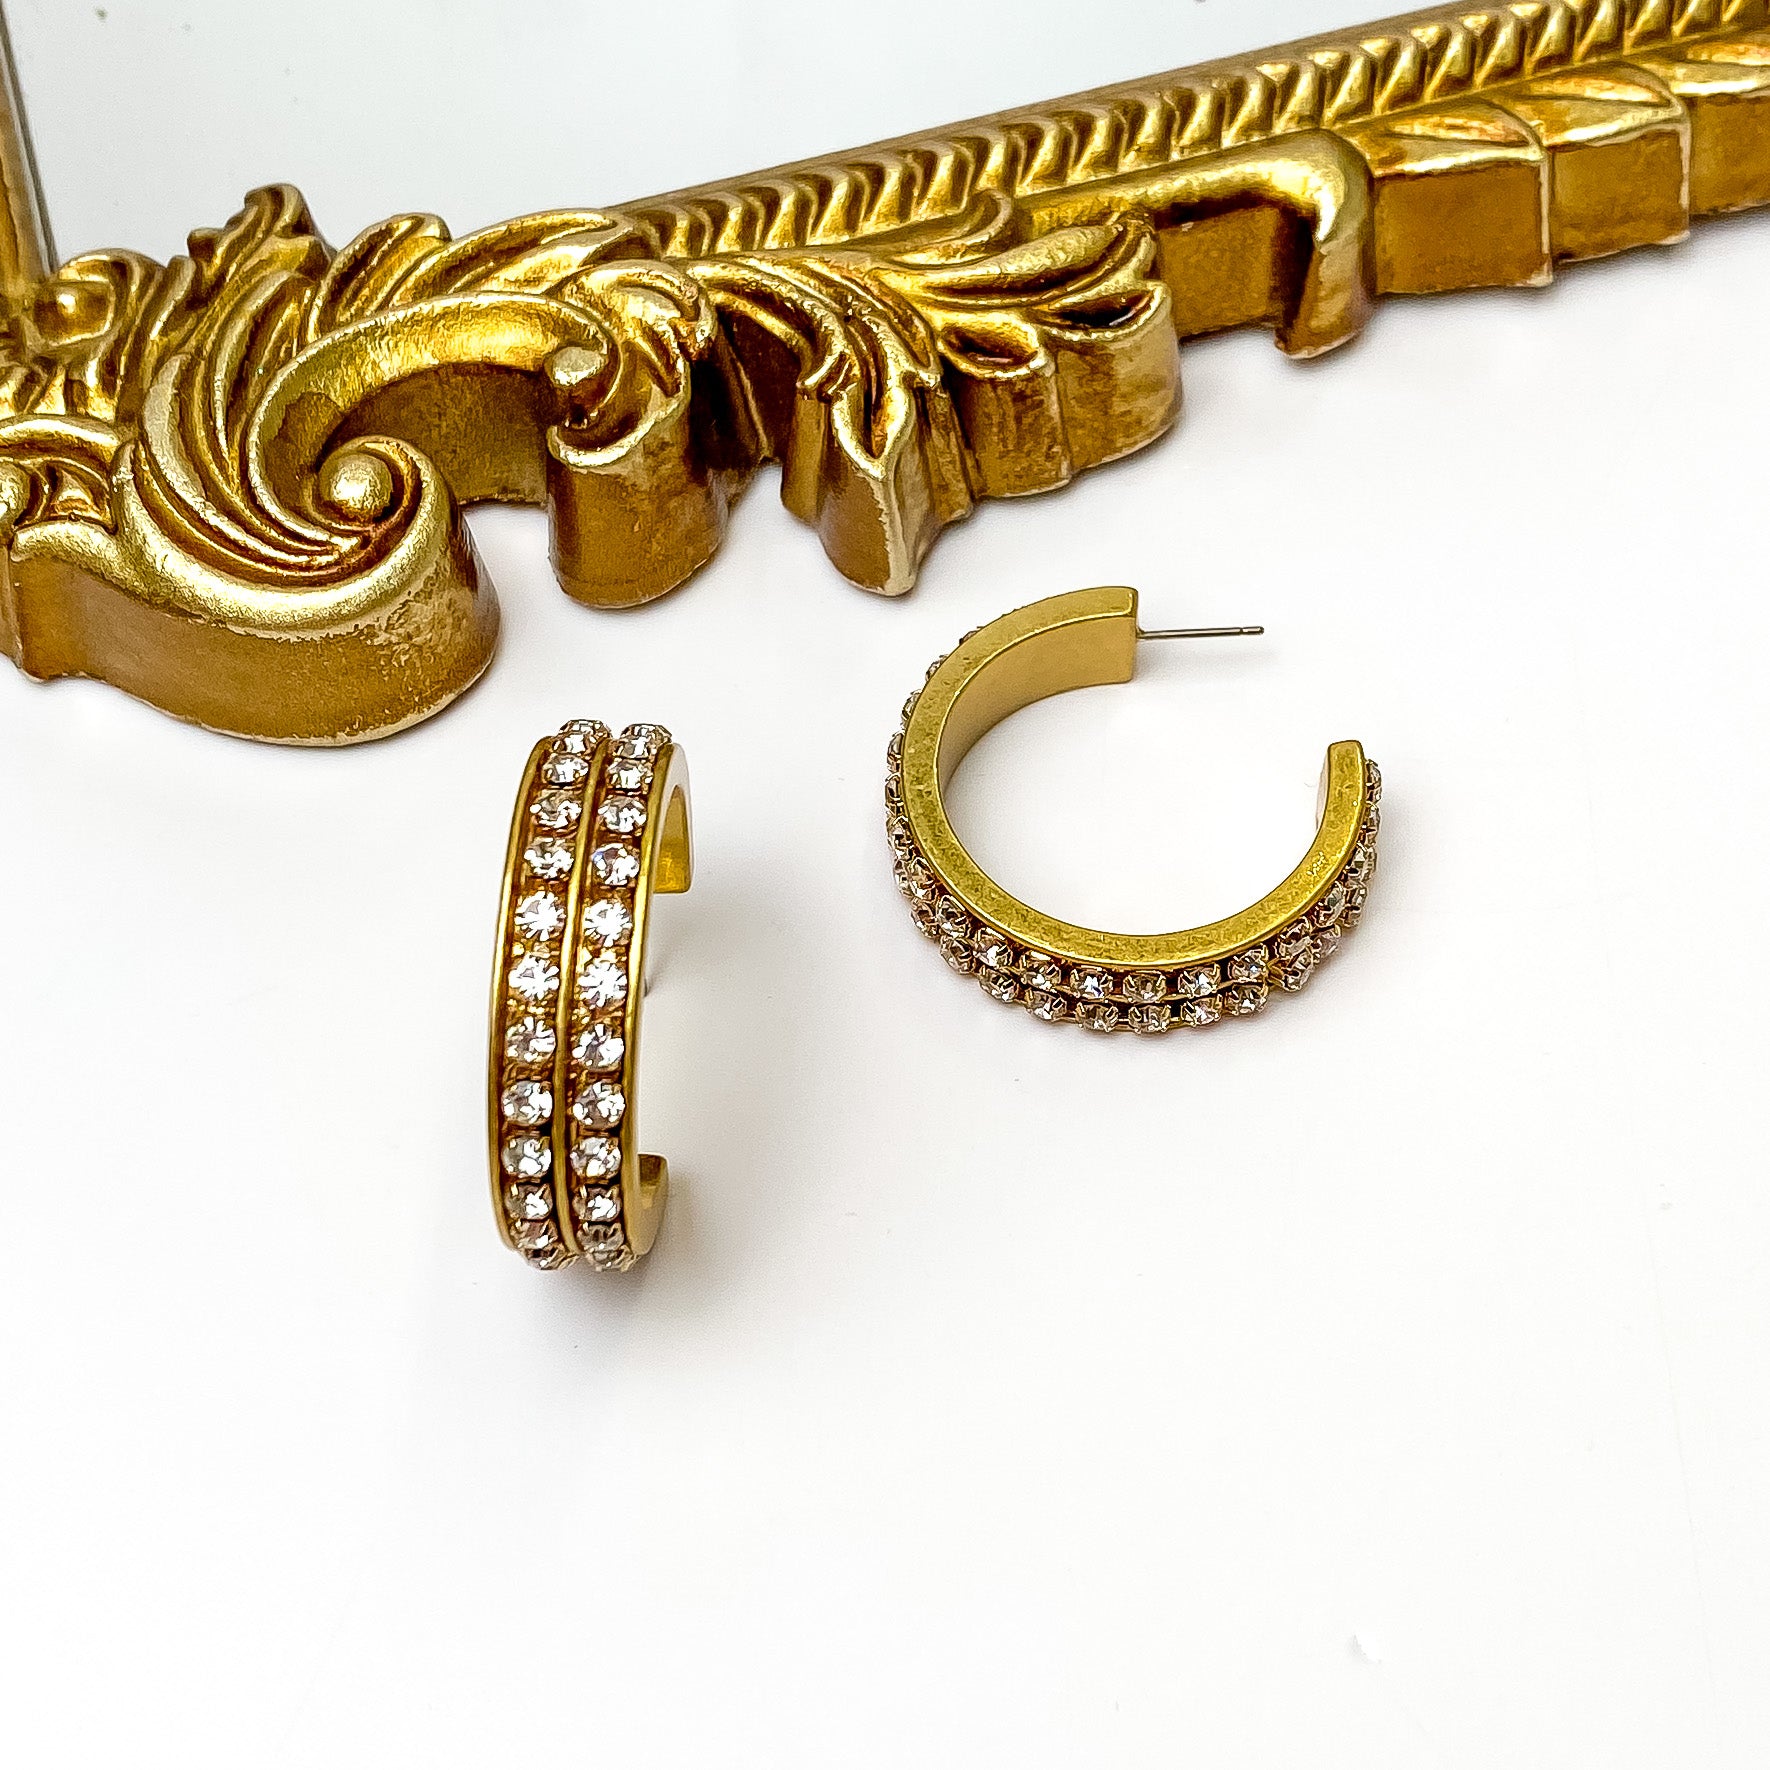 City Nights Gold Tone Hoop Earrings With Double Inlaid Clear Crystals. Pictured on a white background with a gold frame above the earrings.